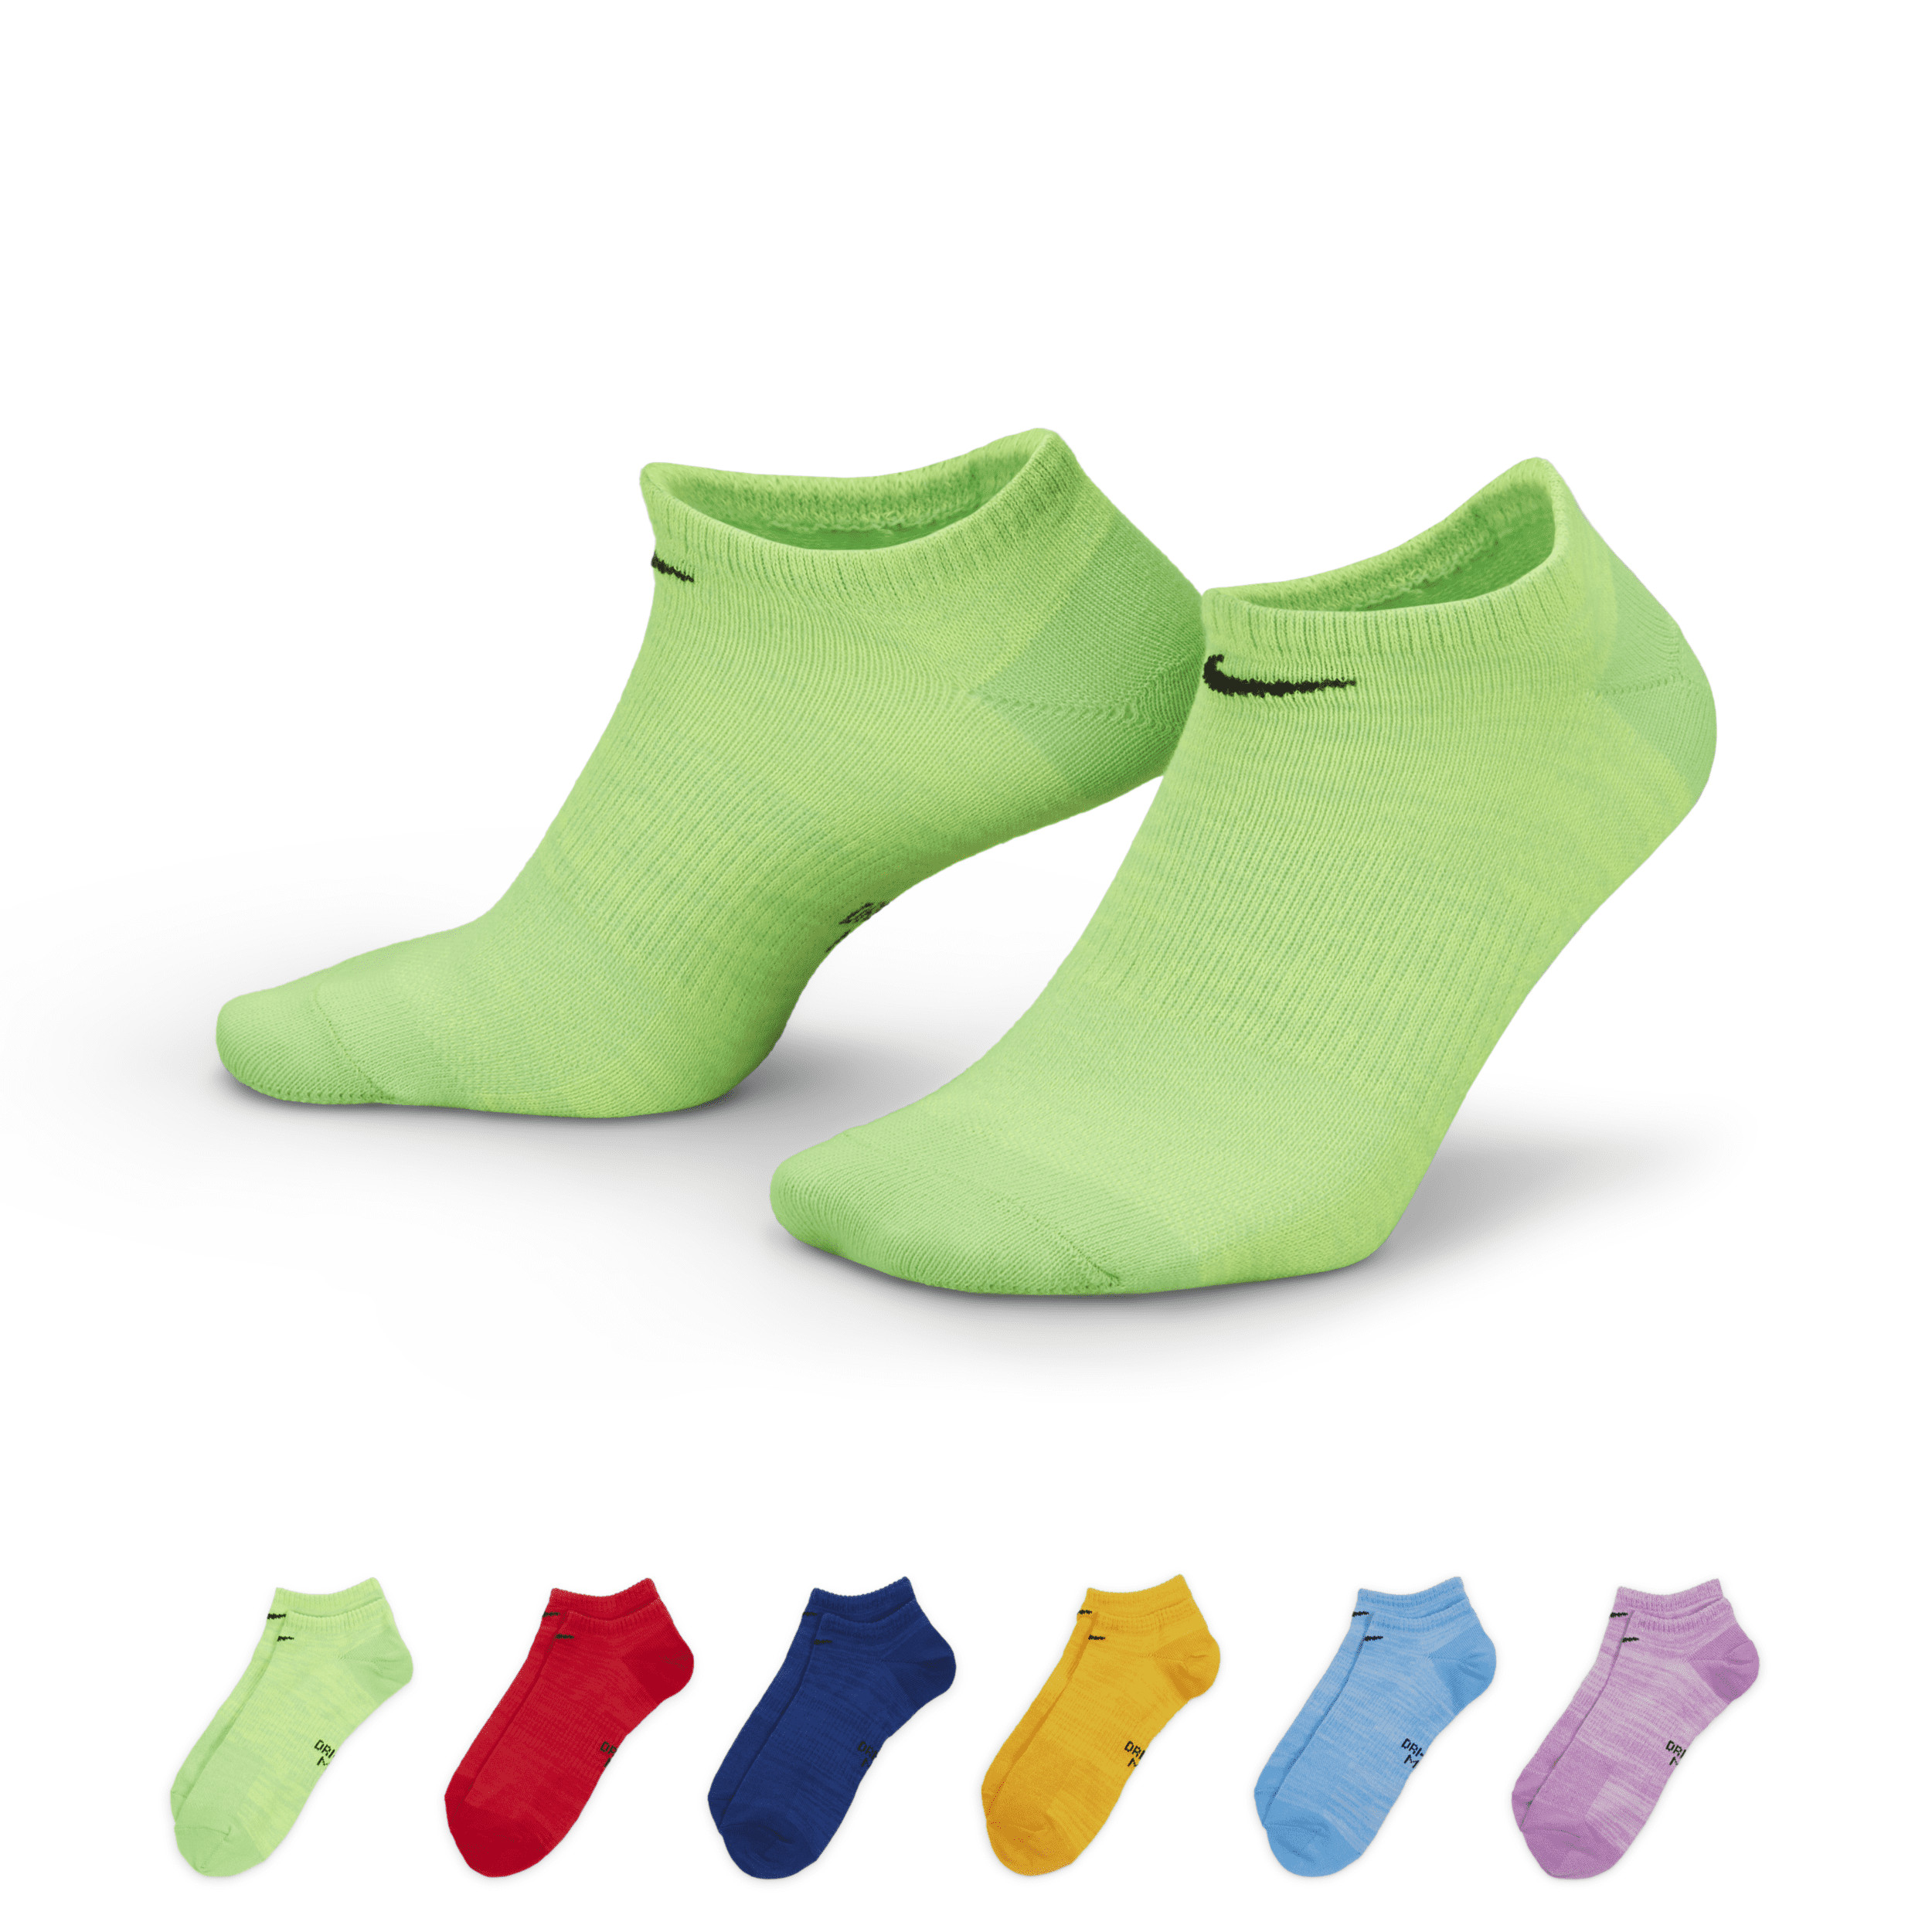 Nike Women's Everyday Lightweight No-show Training Socks (6 Pairs) In Multicolor